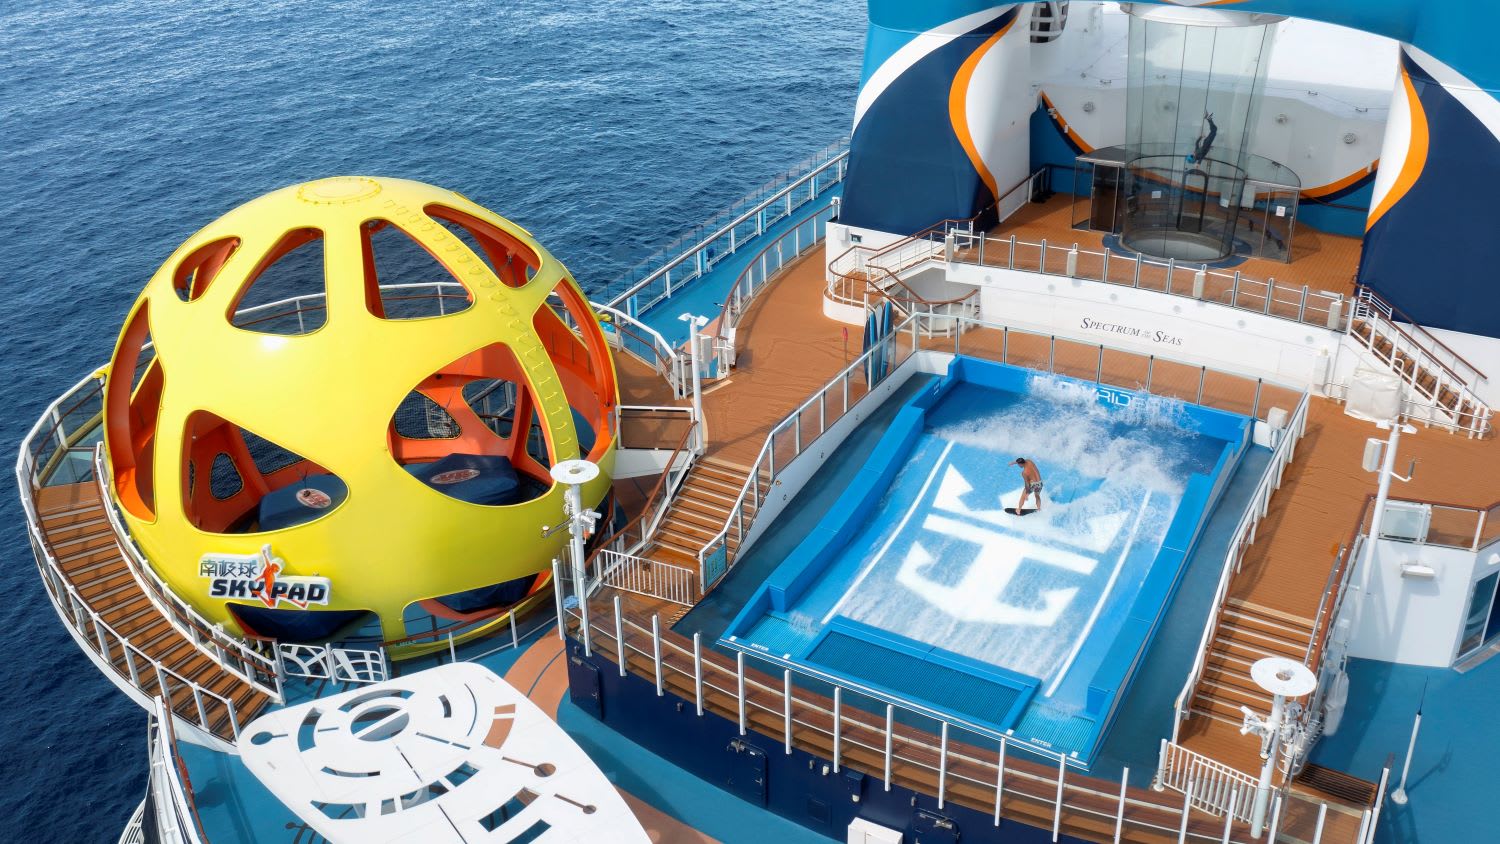 The Sky Pad bungee trampoline and FlowRider surf simulator are located at the stern of Royal Caribbean’s Spectrum of the Seas. Photos: Royal Caribbean